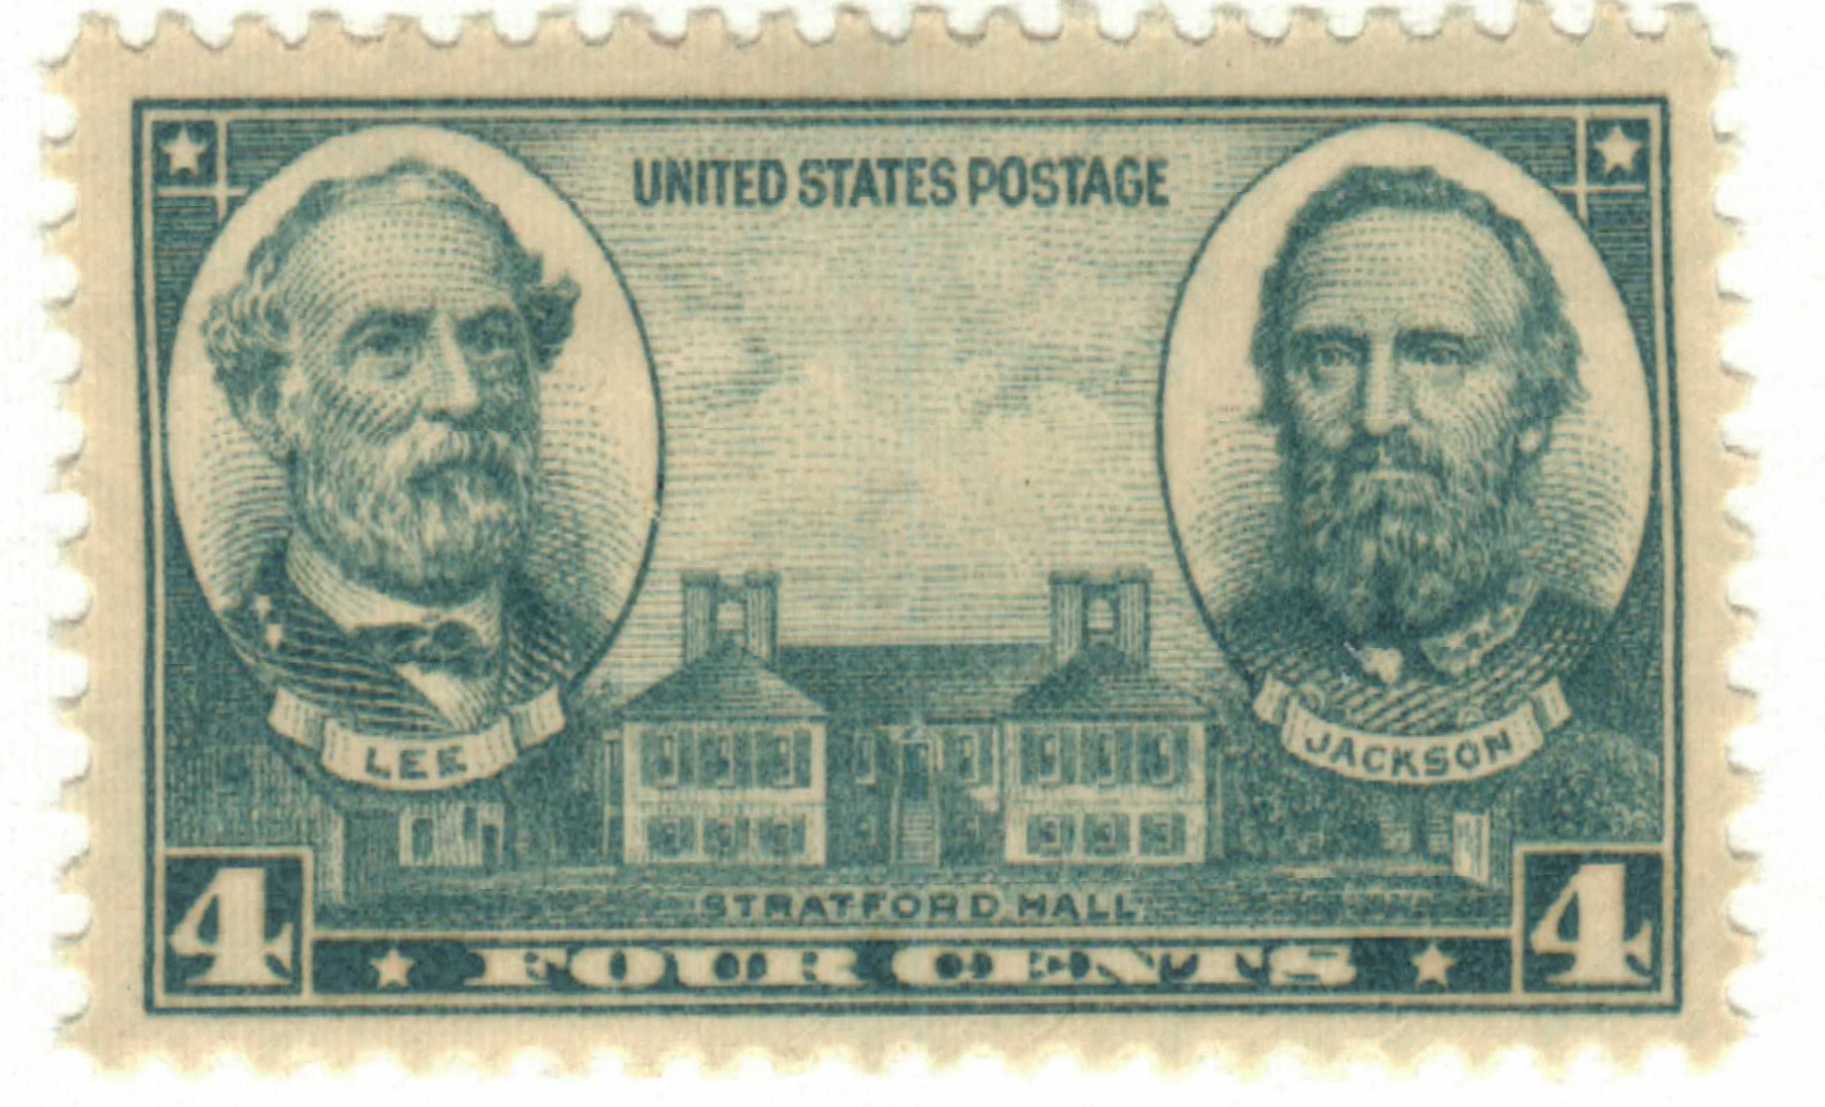 1937 4Â¢ Army and Navy: Lee and Jackson, Stratford Hall stamp